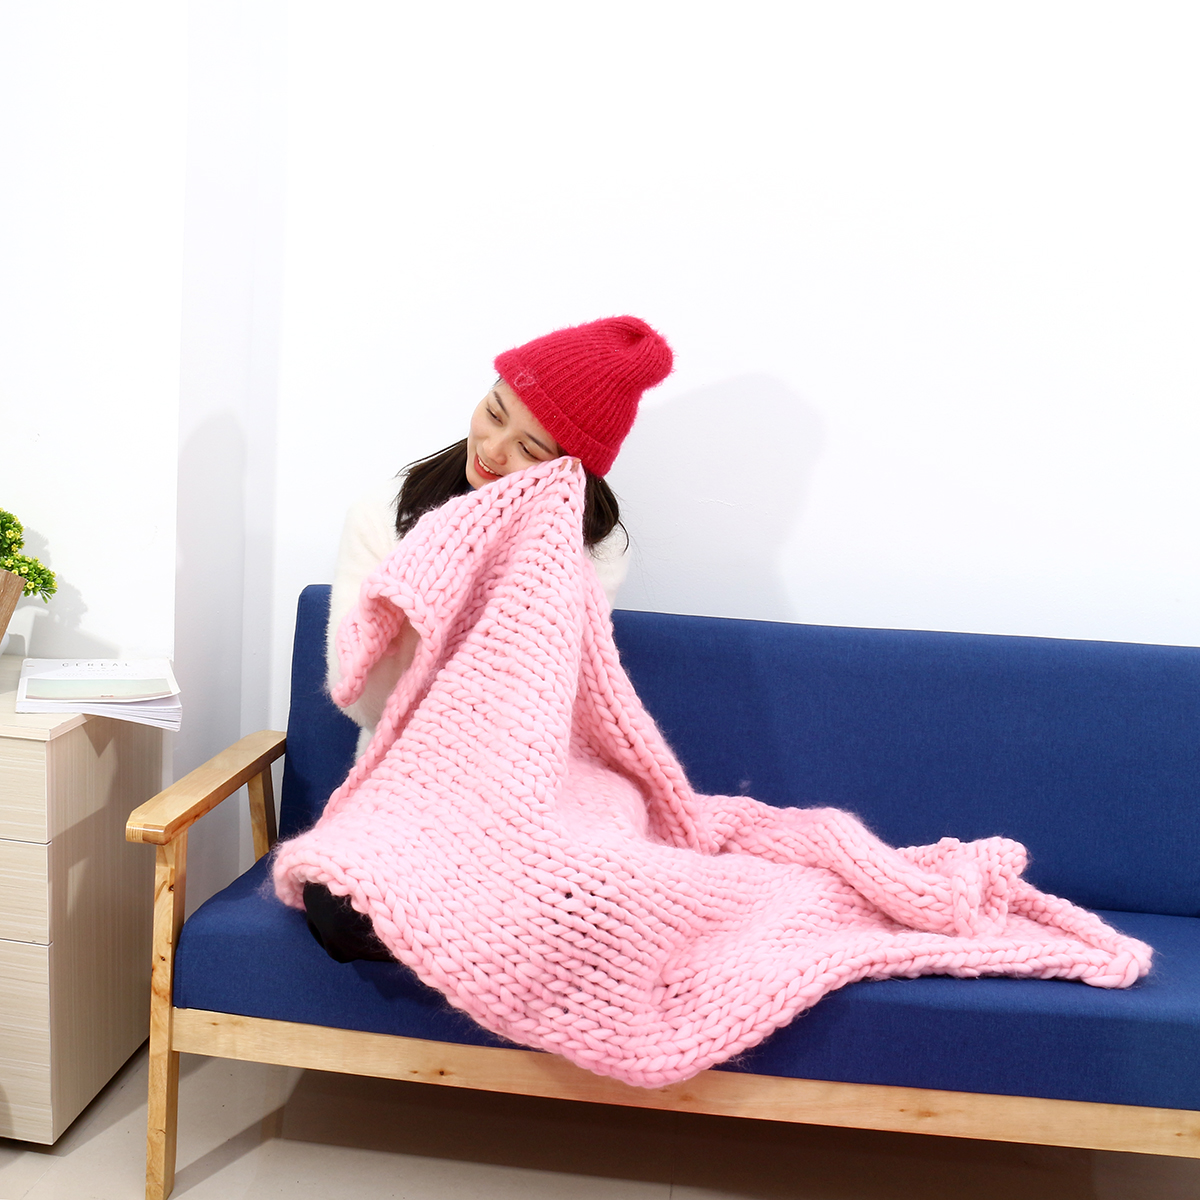 80x100CM-Handmade-Polyester-Fiber-Knitted-Blanket-Pure-Air-Conditioning-Bulky-Knitting-Throw-Blanket-1800712-2